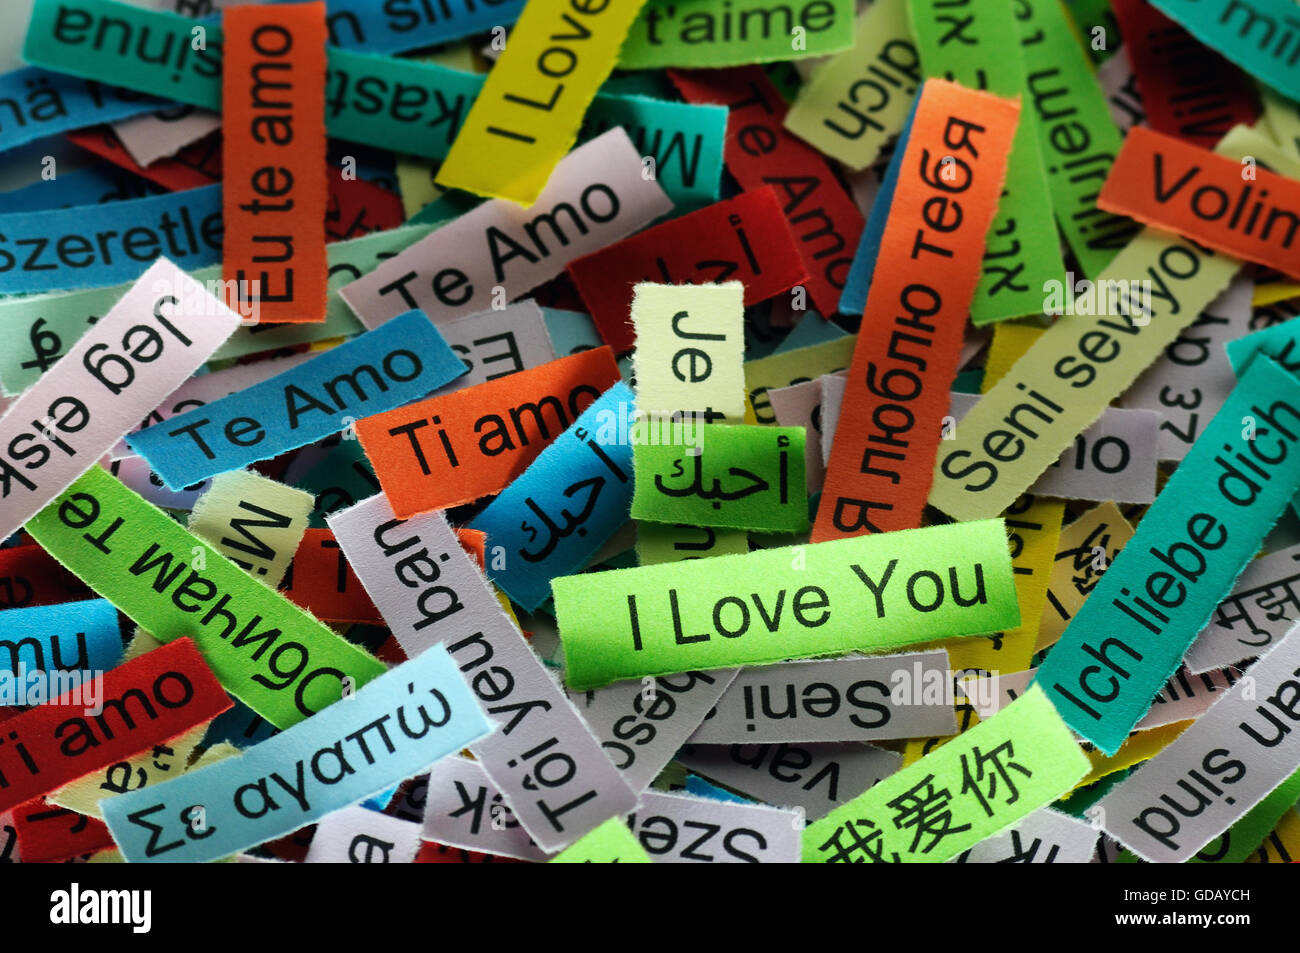 I Love You   Word Cloud printed on colorful paper different languages Stock Photo